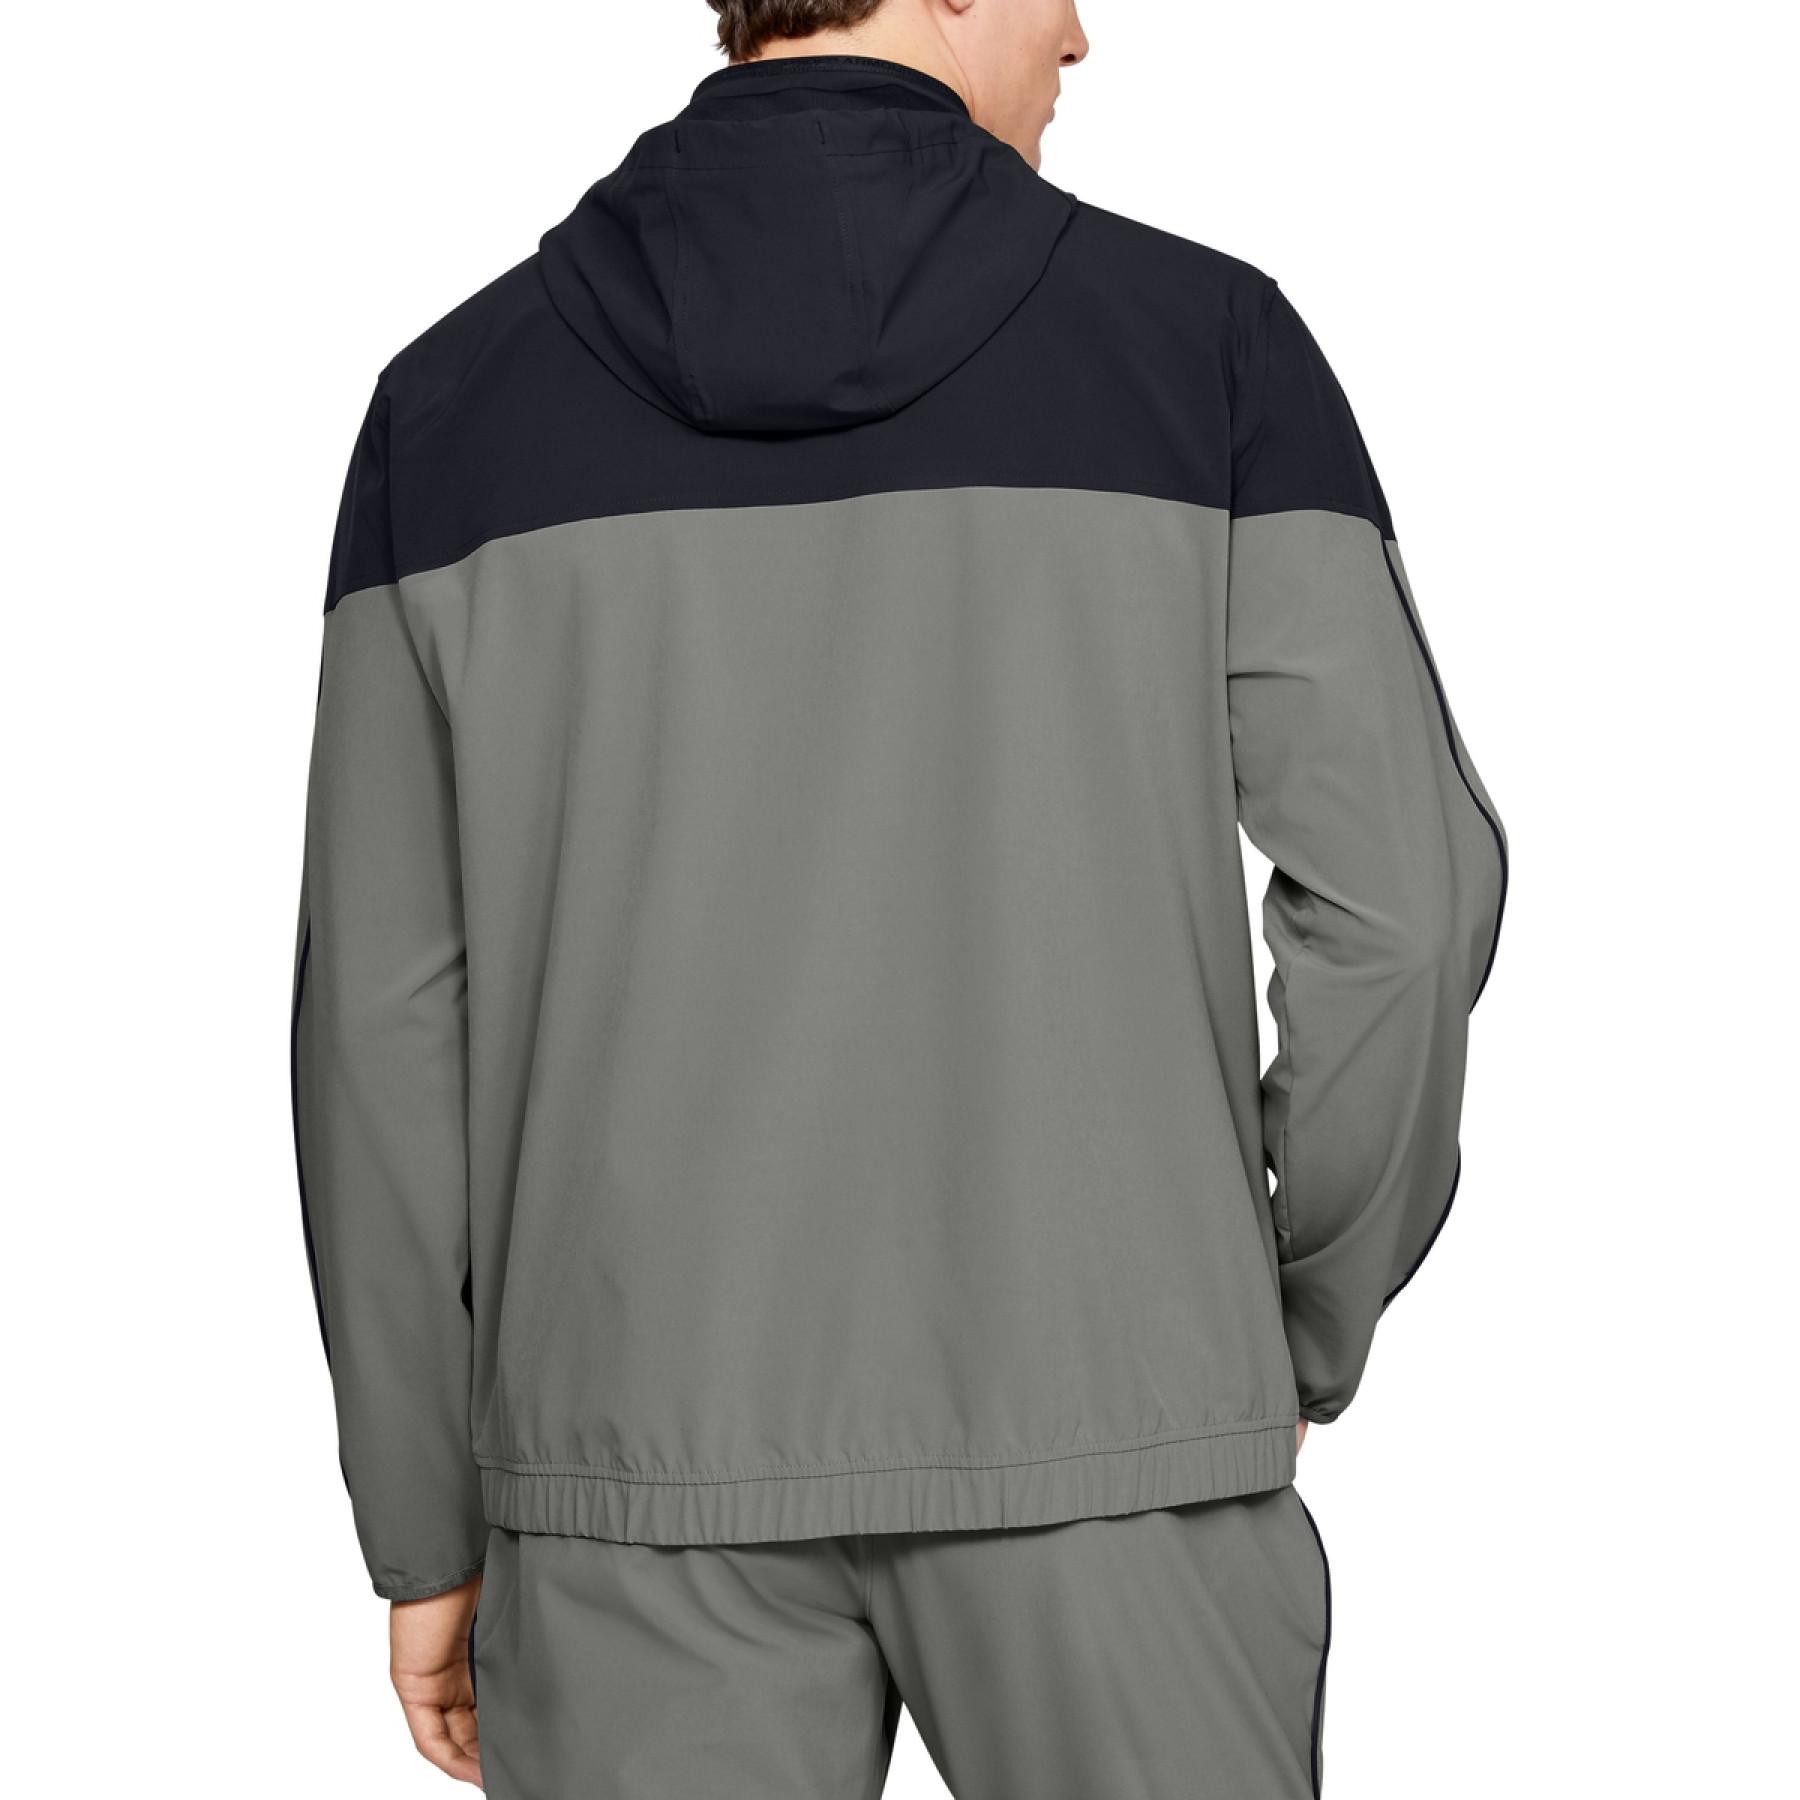 Jacka Under Armour recover Woven Warm-Up